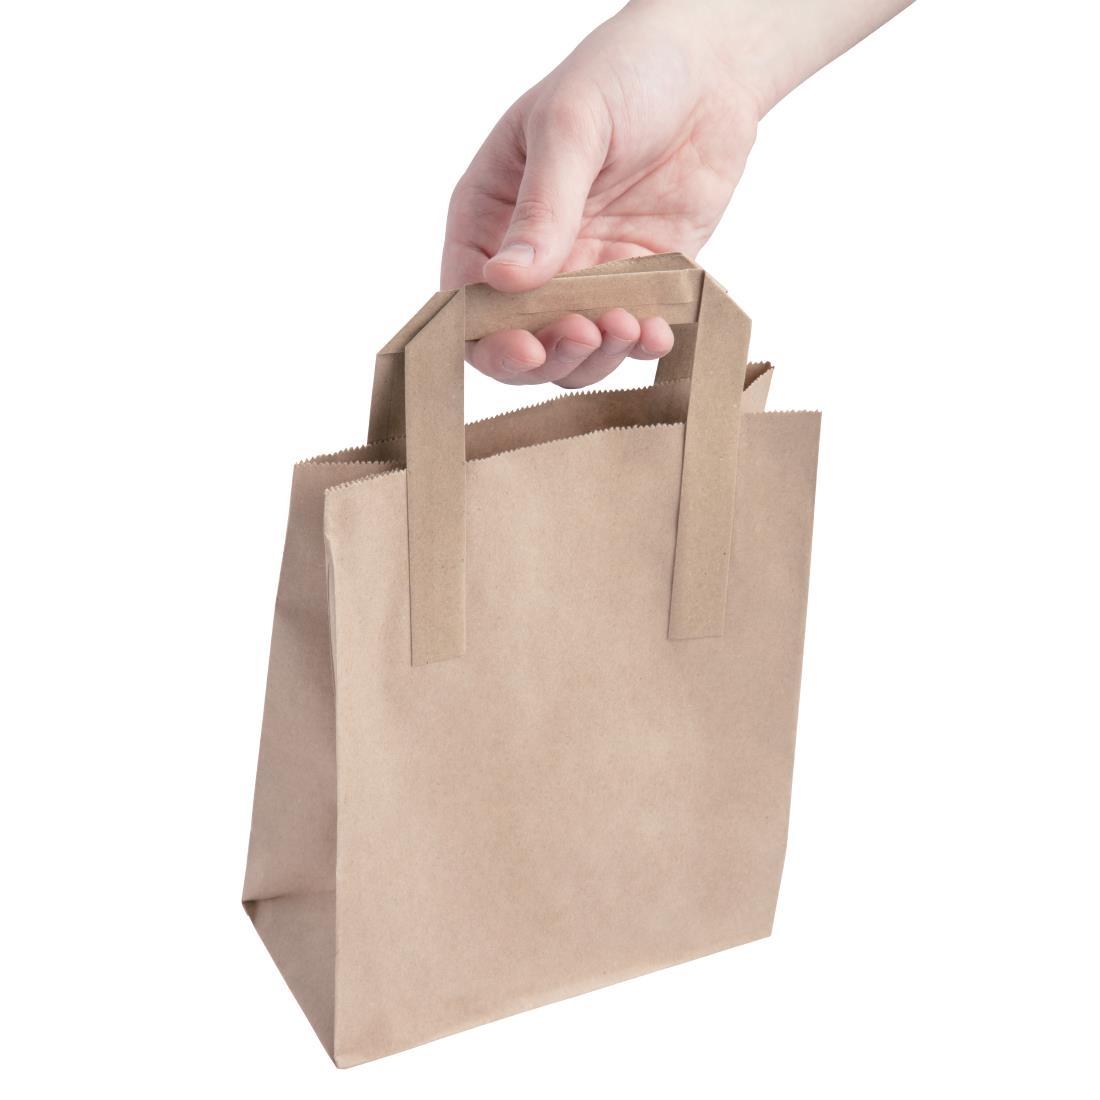 Fiesta Compostable Recycled Brown Paper Carrier Bags Small (Pack of 250) - CS351  - 4